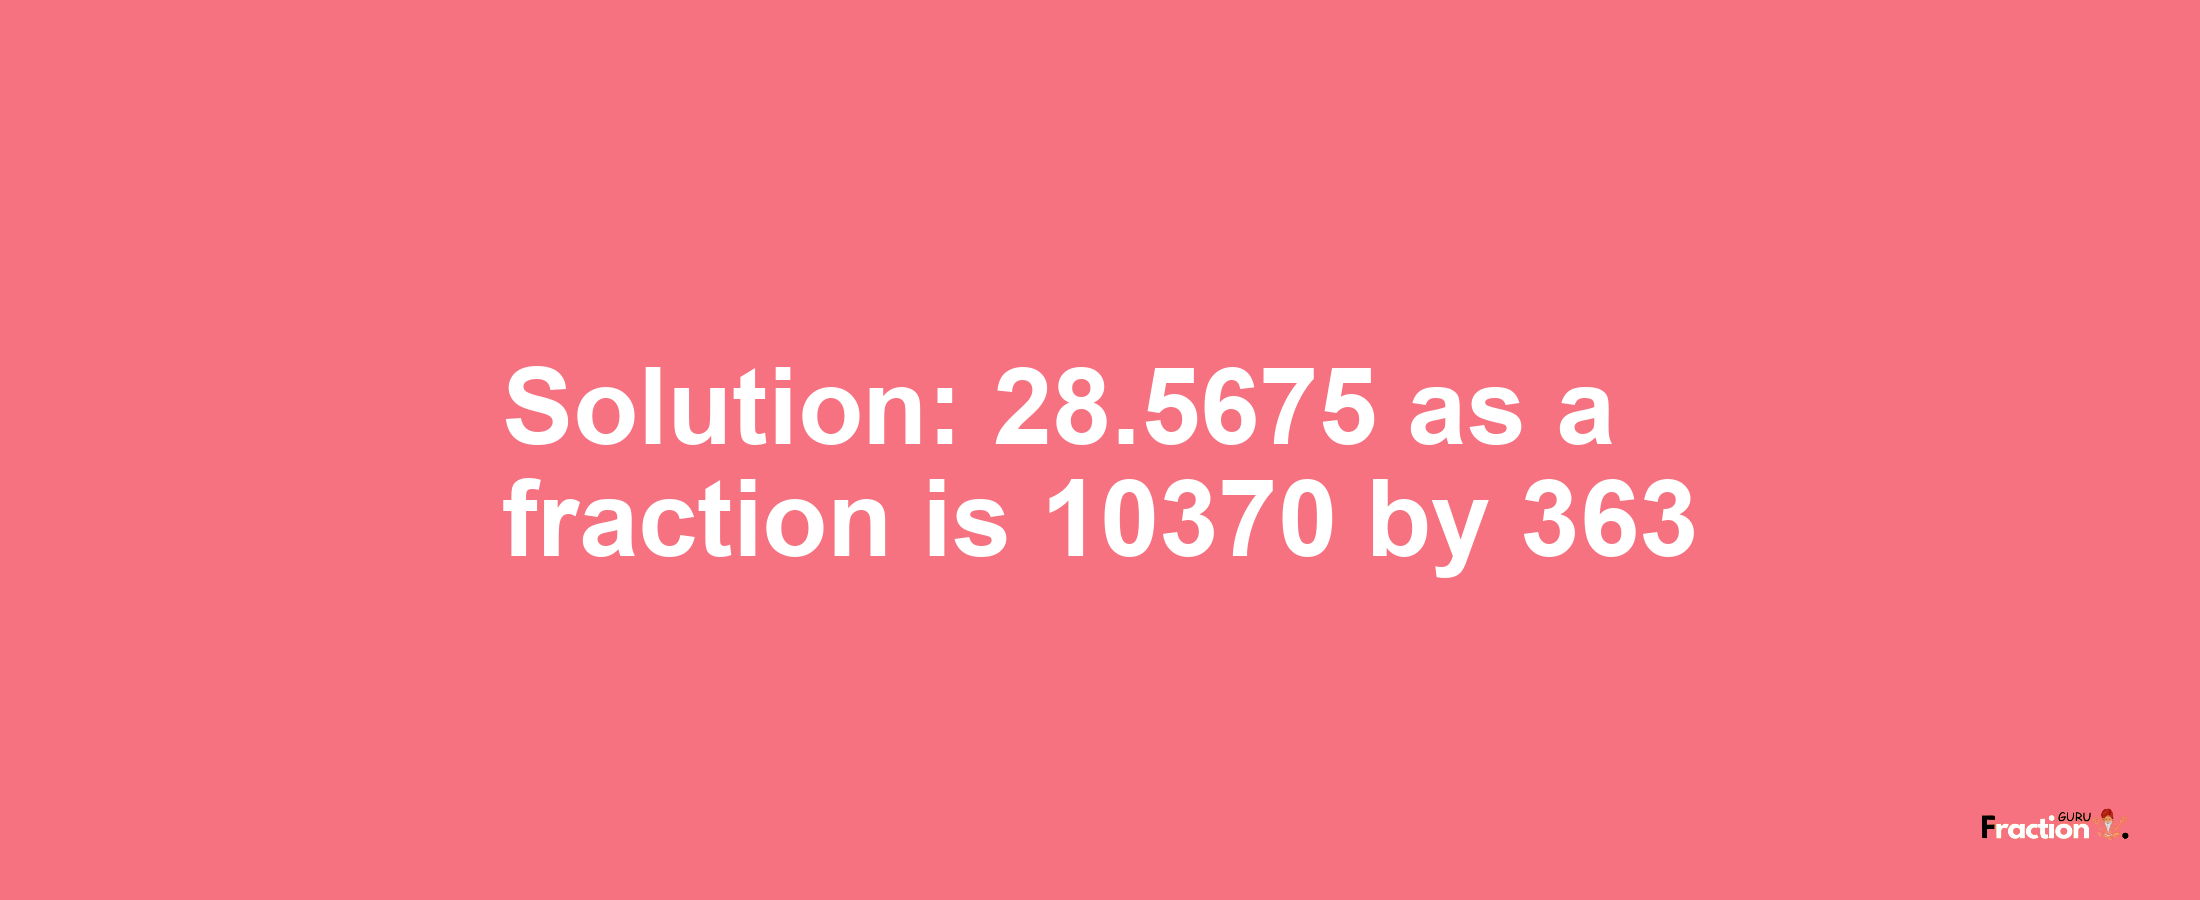 Solution:28.5675 as a fraction is 10370/363